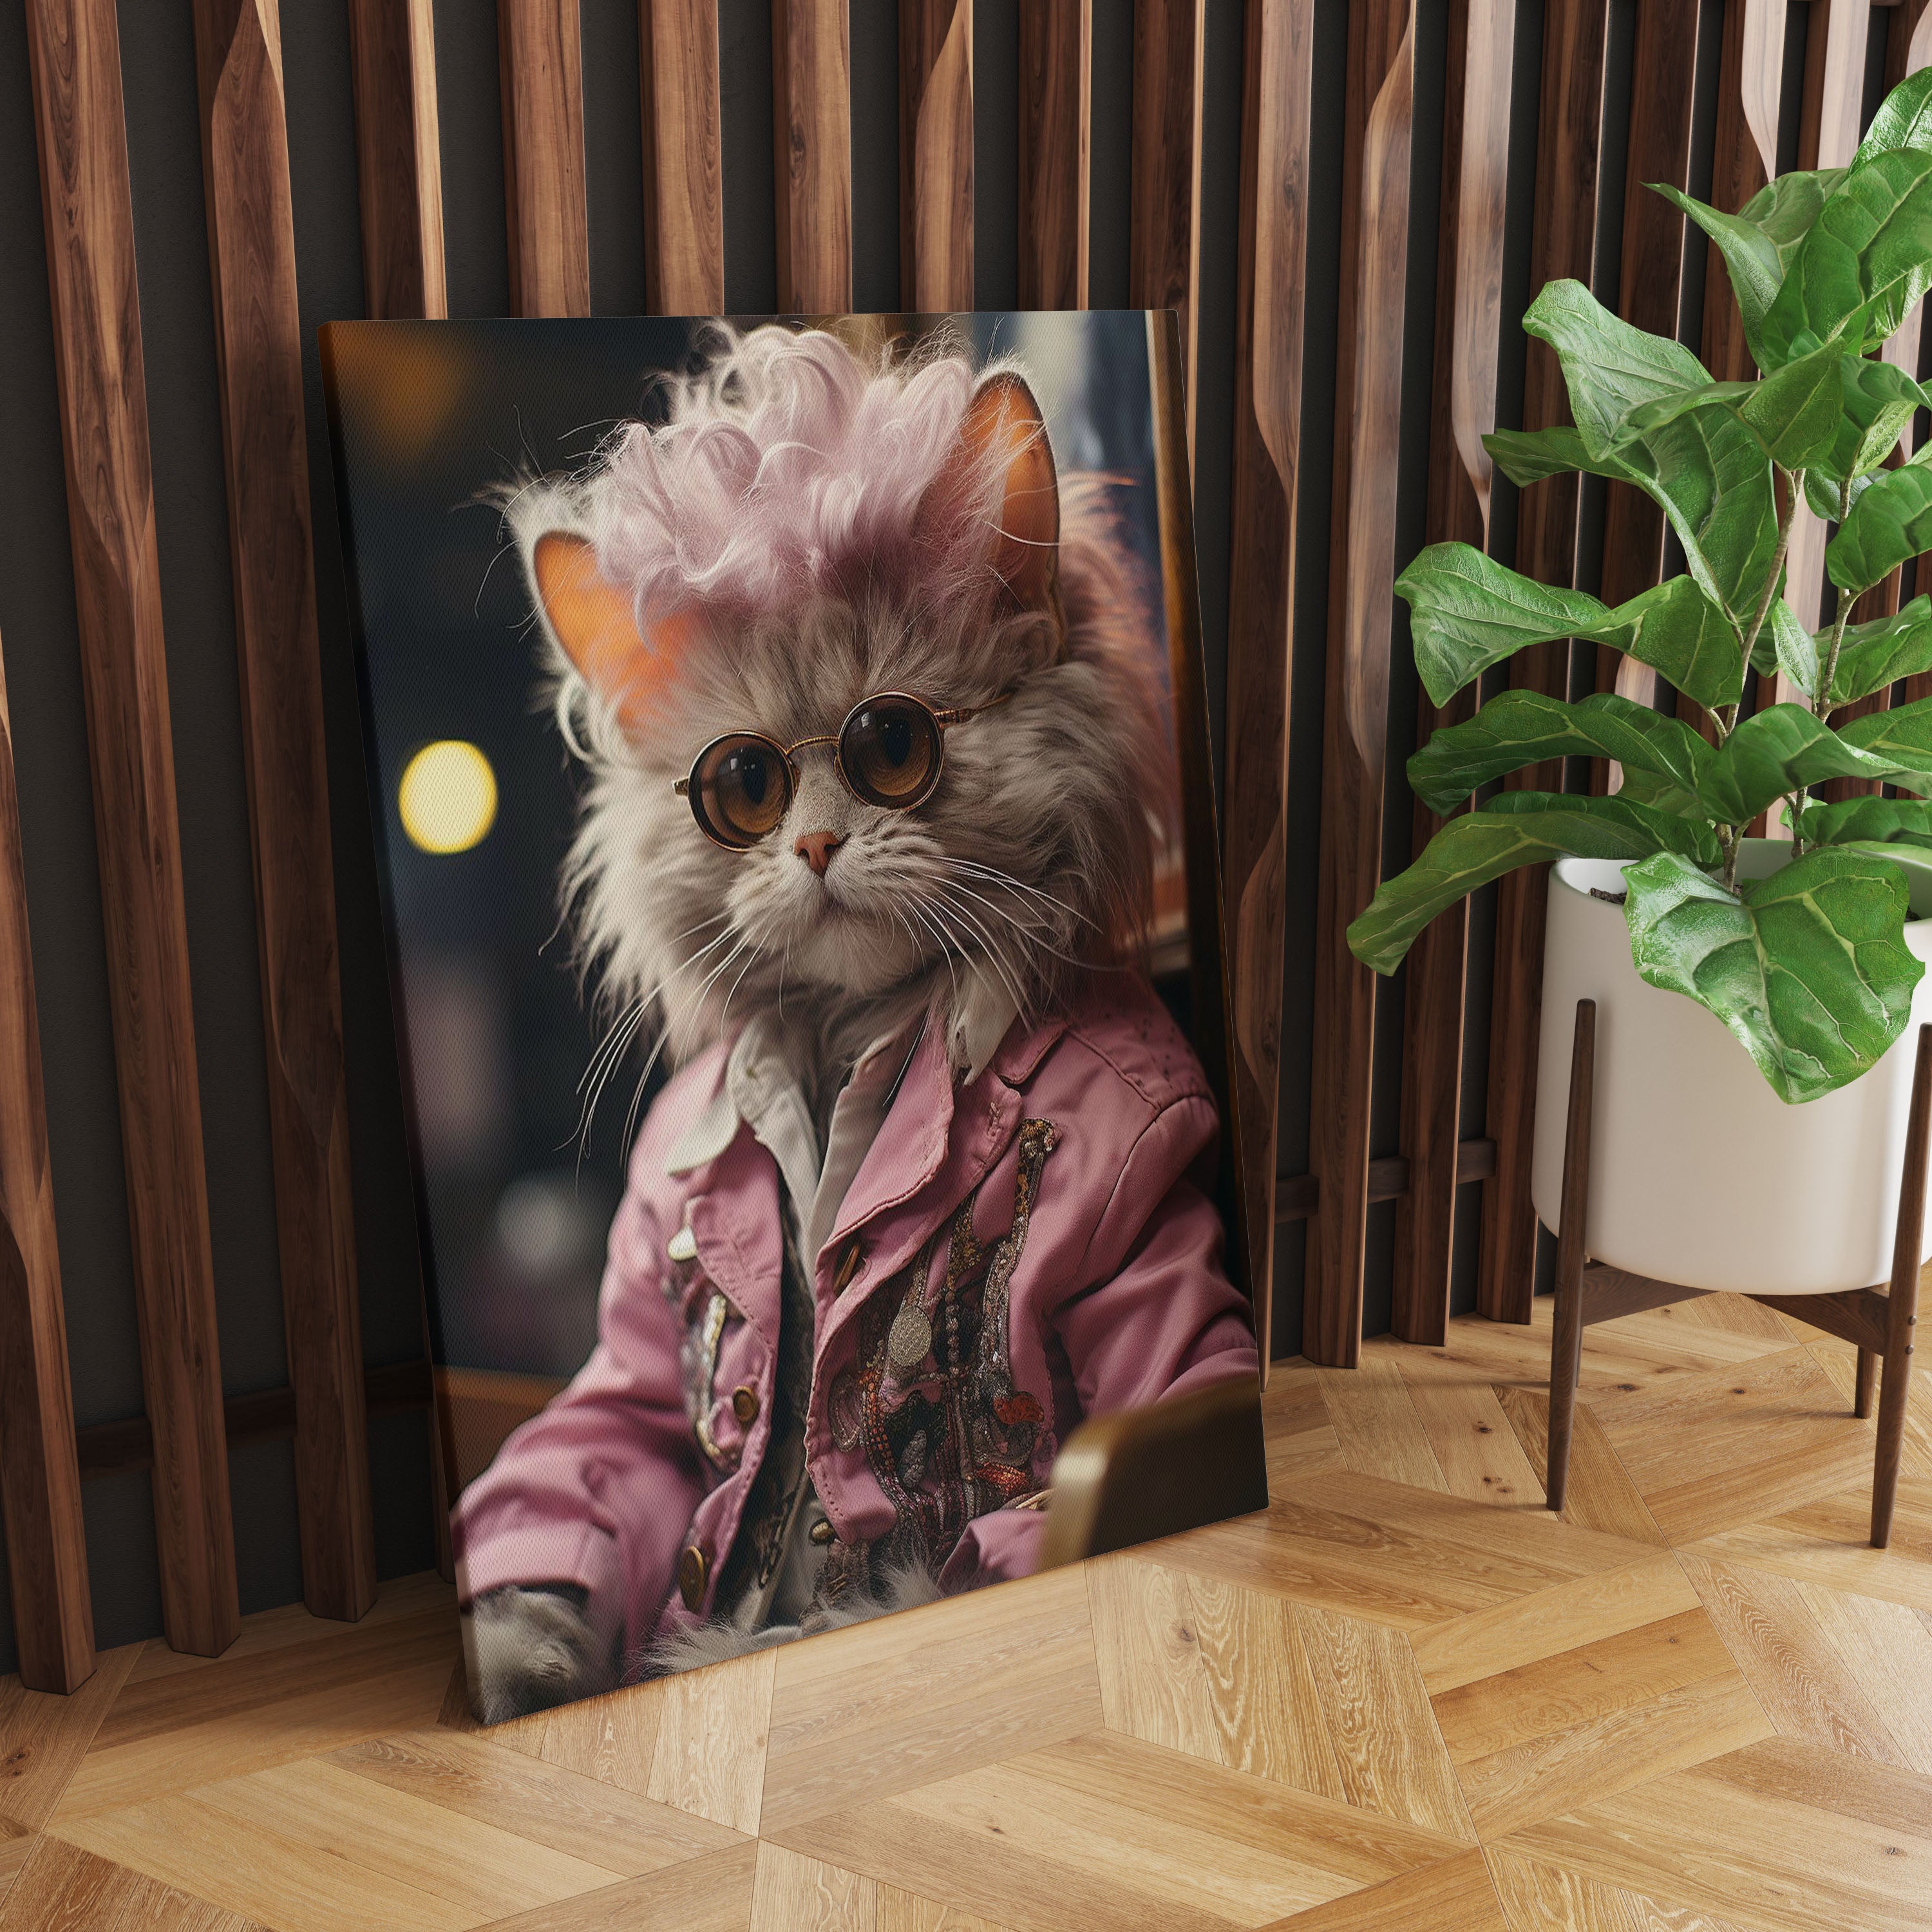 Cute Cat Canvas Wall Painting